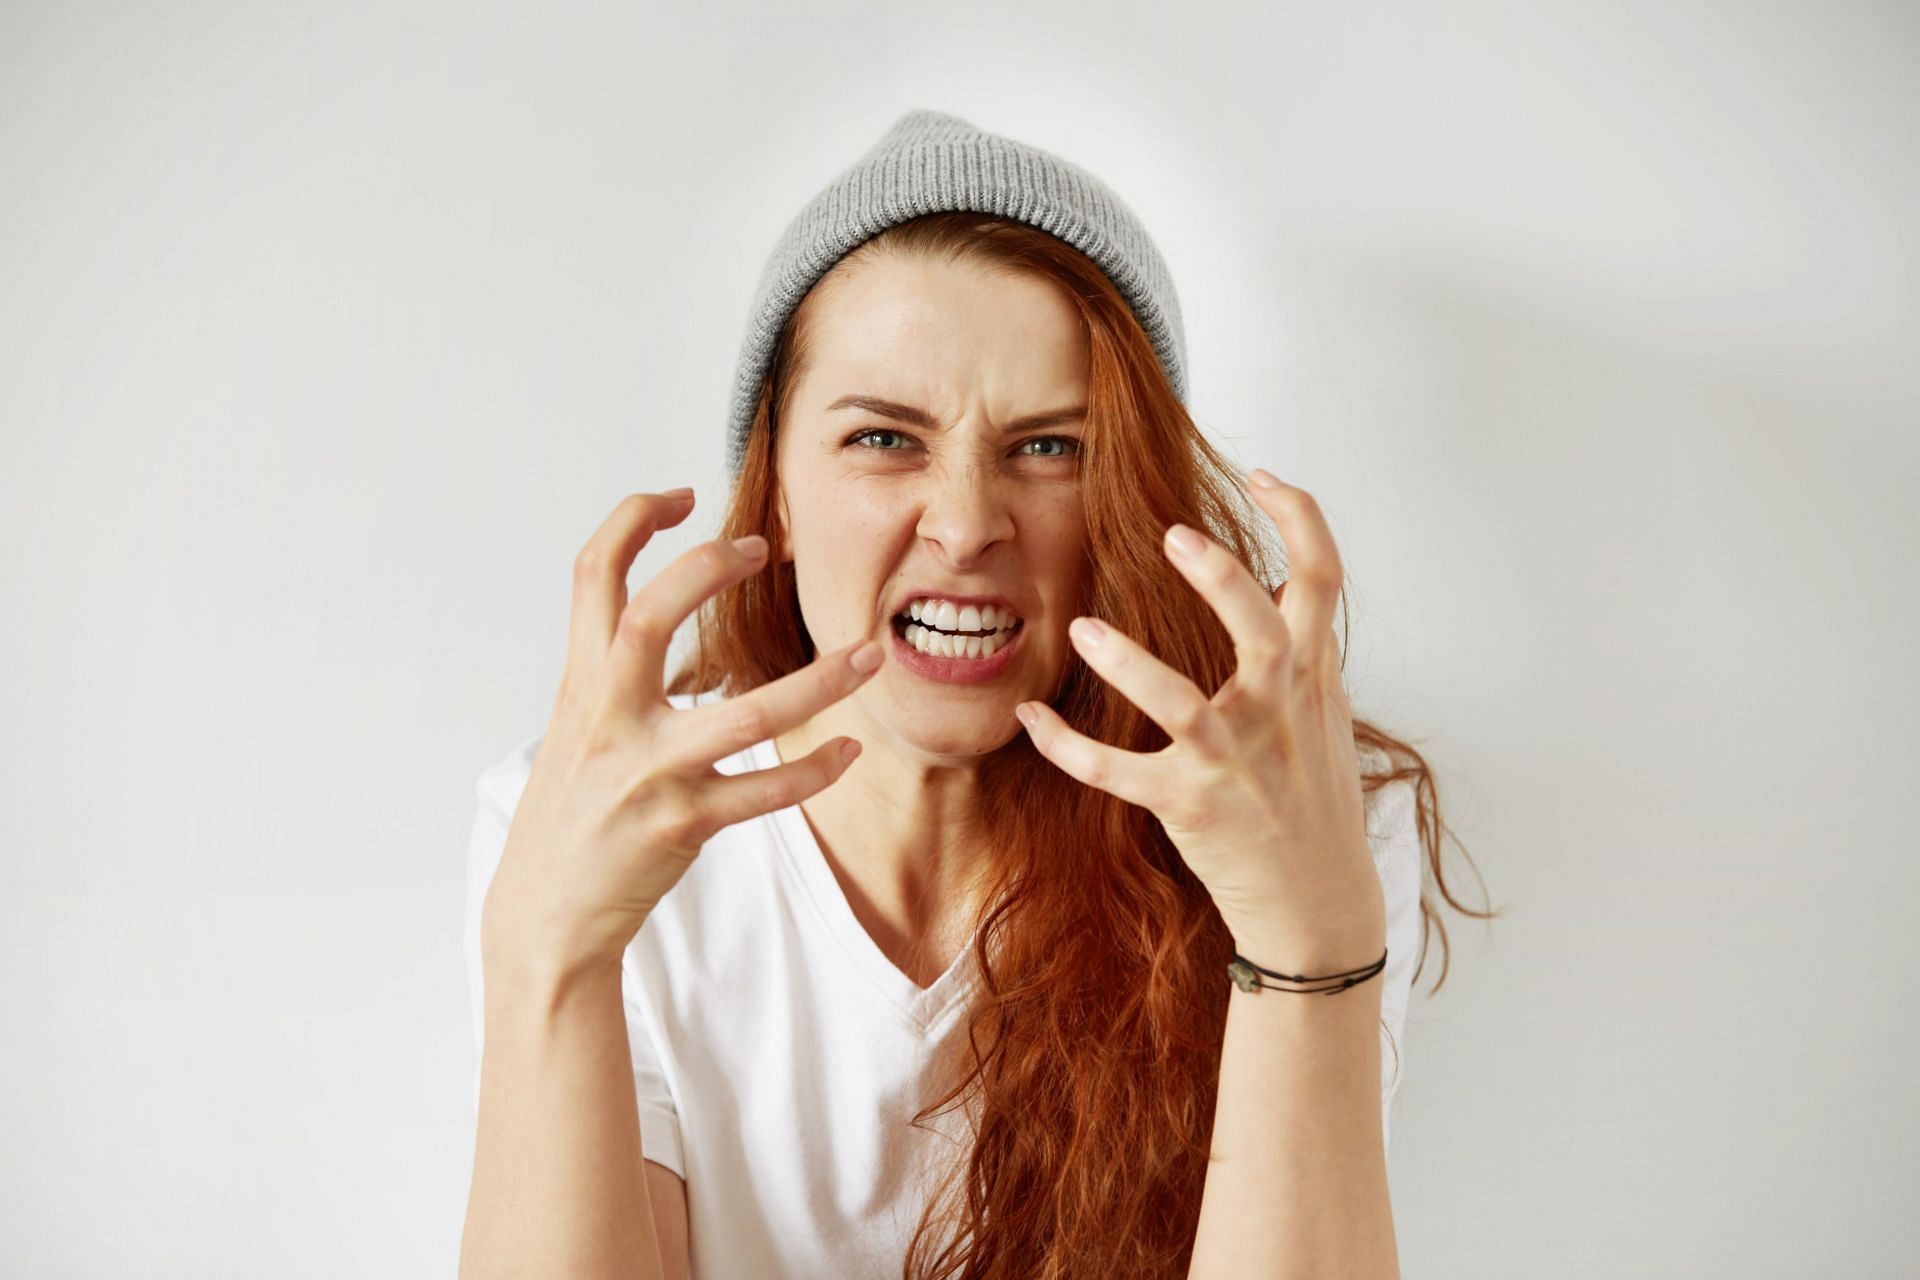 Do you cry when angry? What causes this? Are there ways to deal with it? (Image via Freepik/ Freepik)